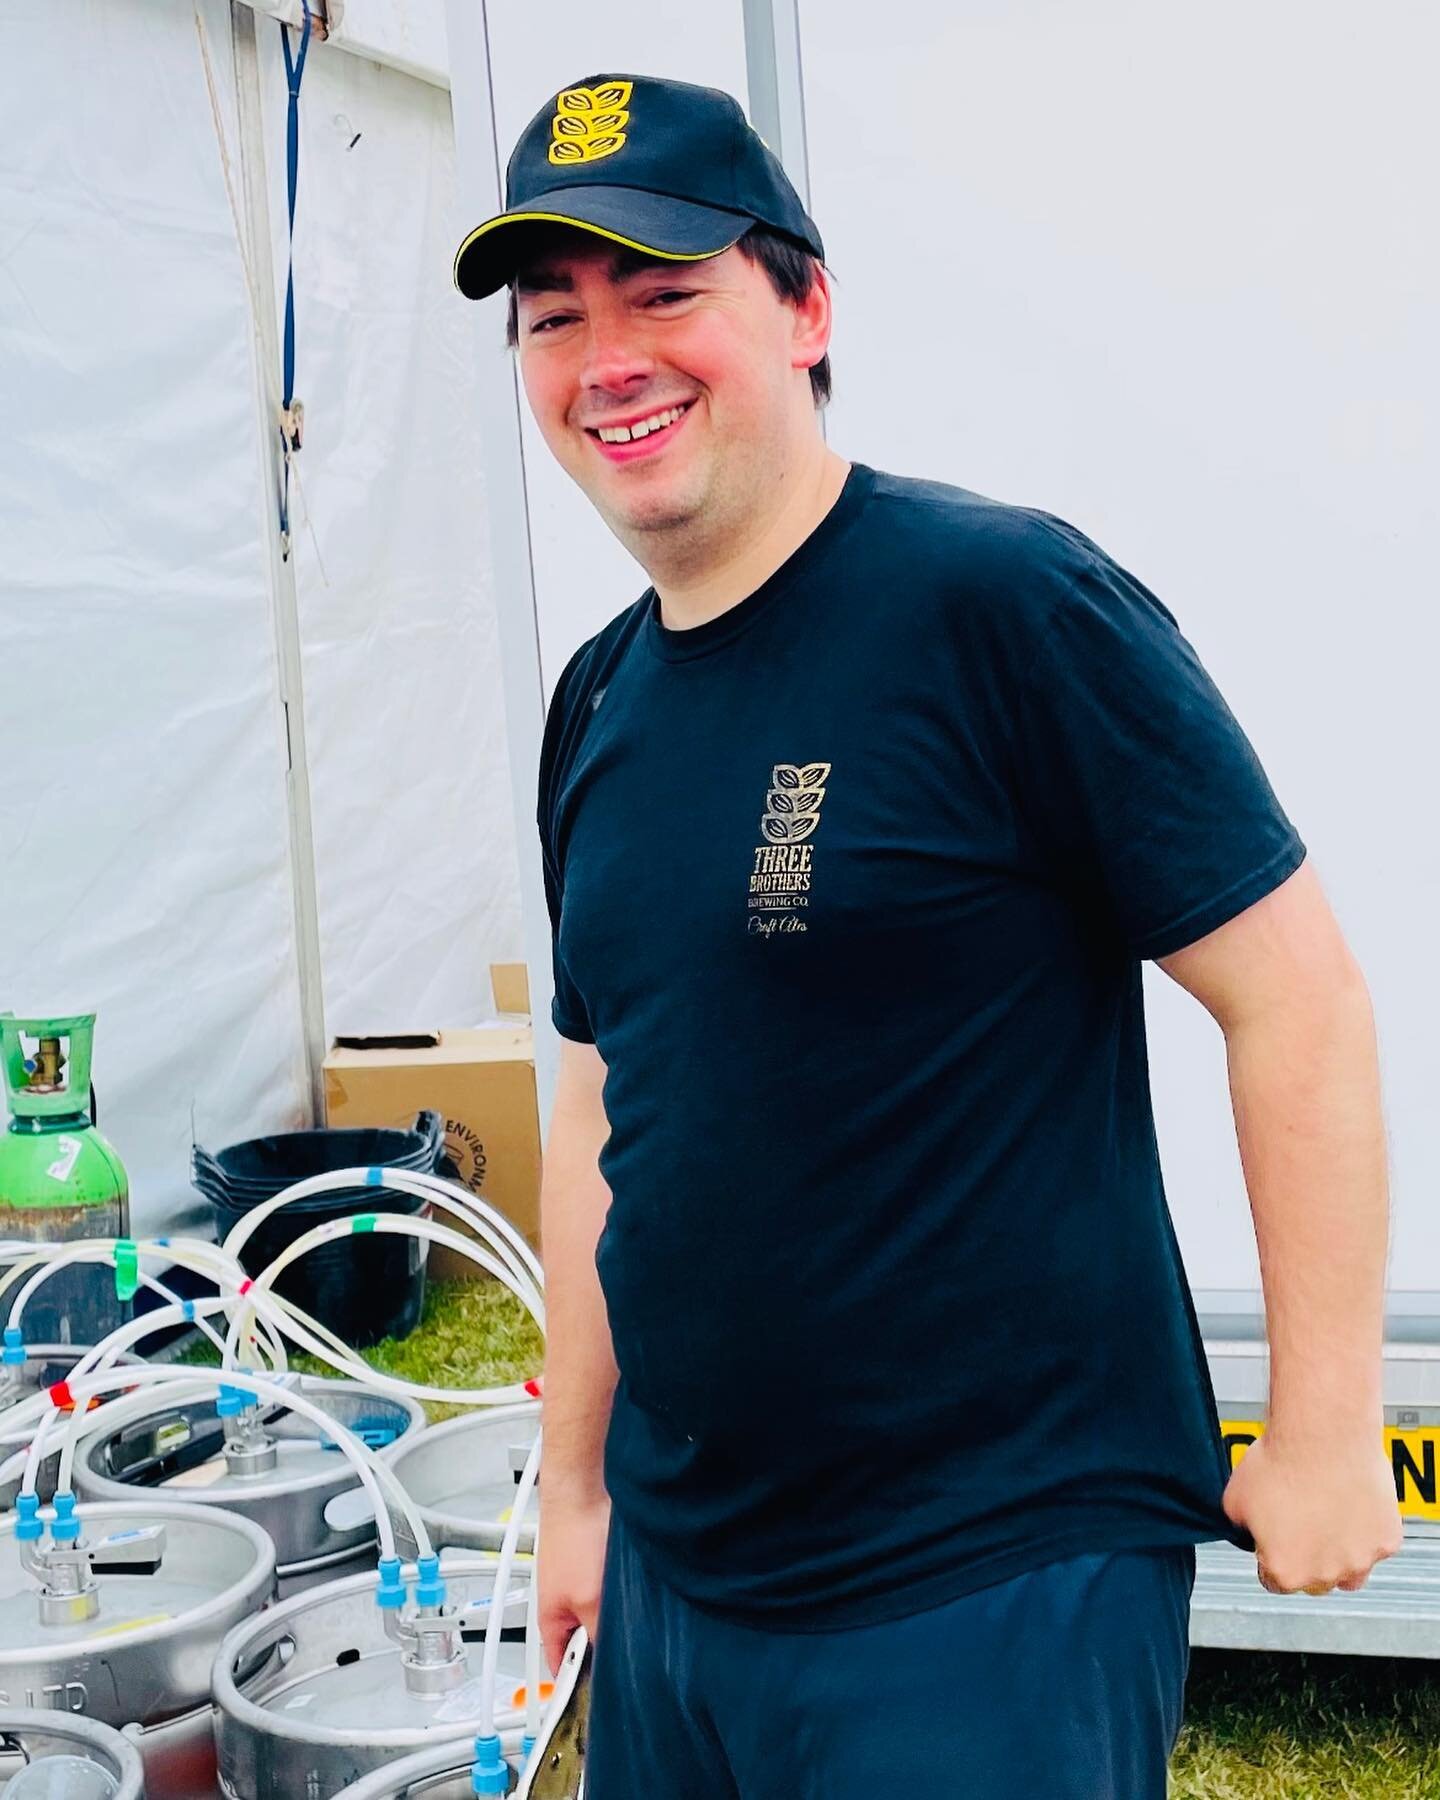 The morning after the busiest two days EVER and before we even recover this AMAZING man needs a shout out 💙

Dave we cannot thank you enough for all your support, expertise in helping keeping all those beers super cool for the troops over the last f